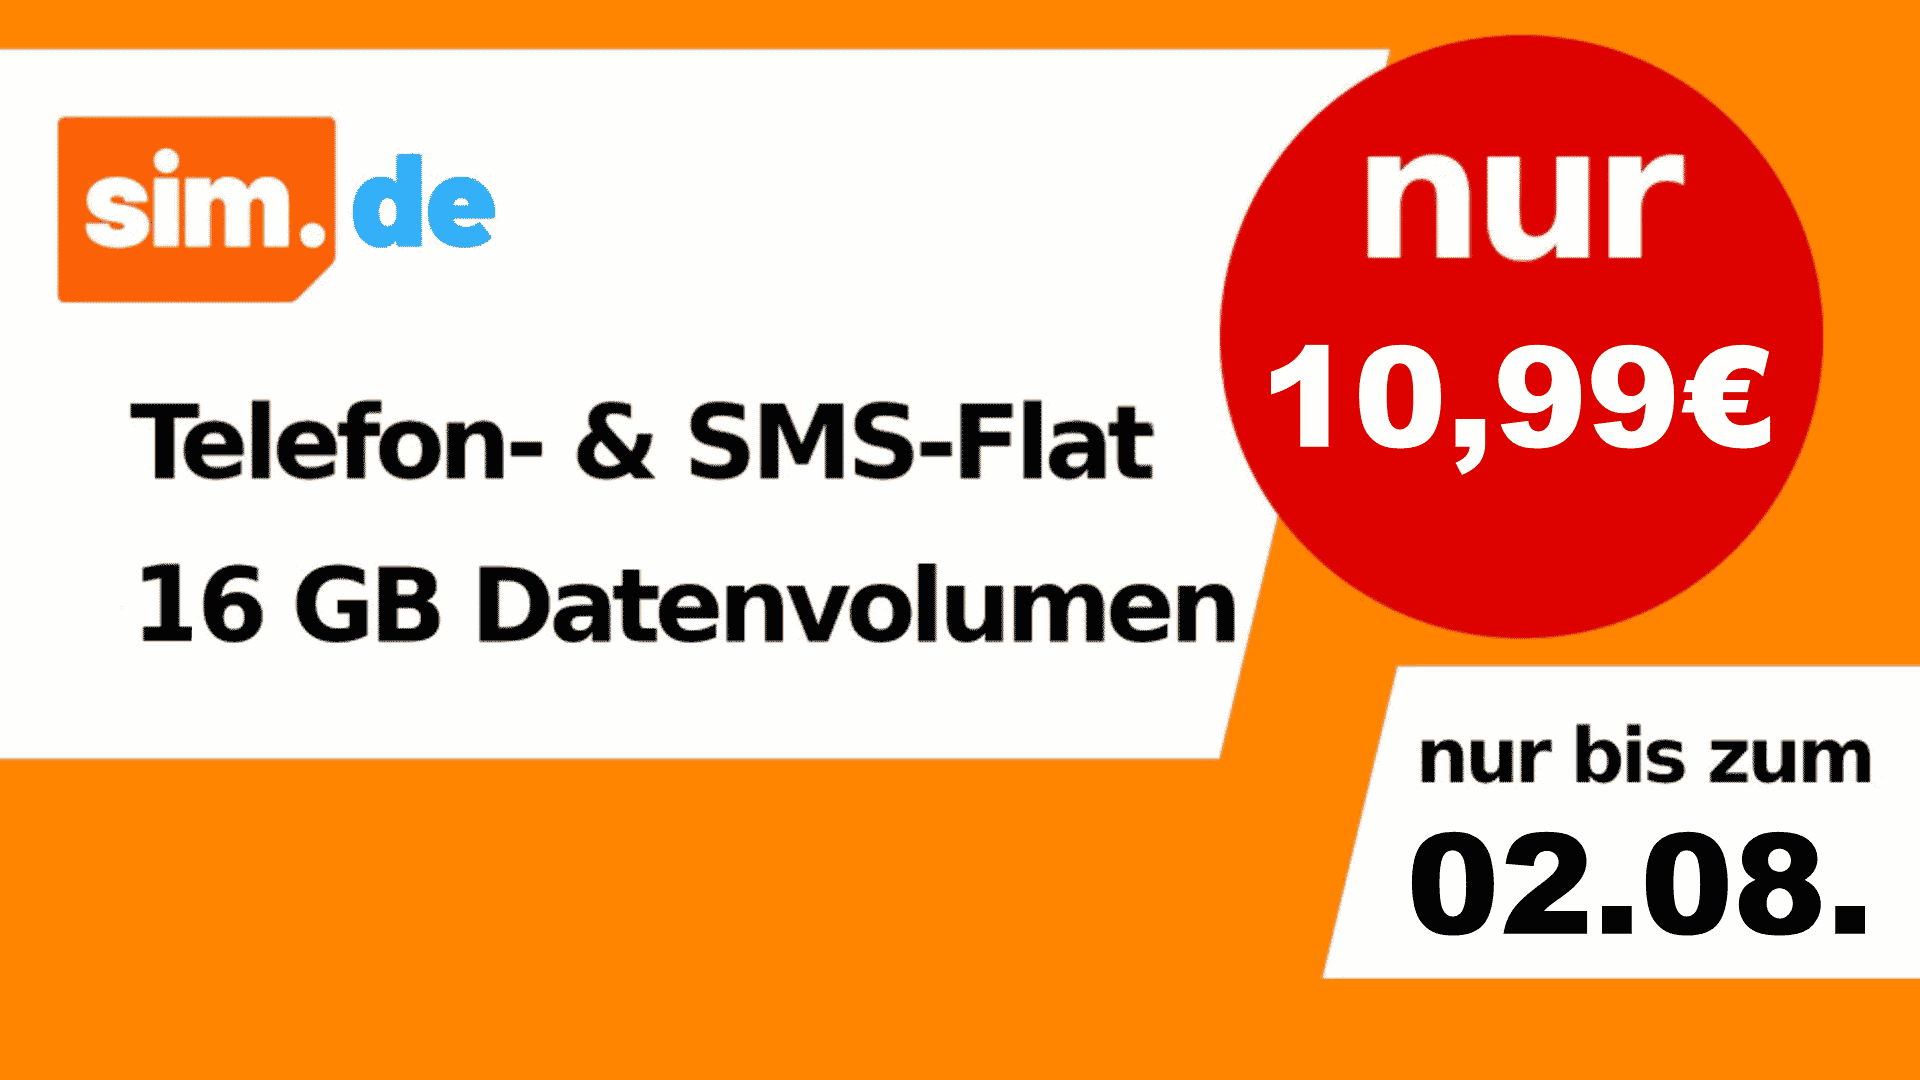 Inexpensive mobile phone tariff with a flat rate and 16 GB now at the best price on offer at Sim.de